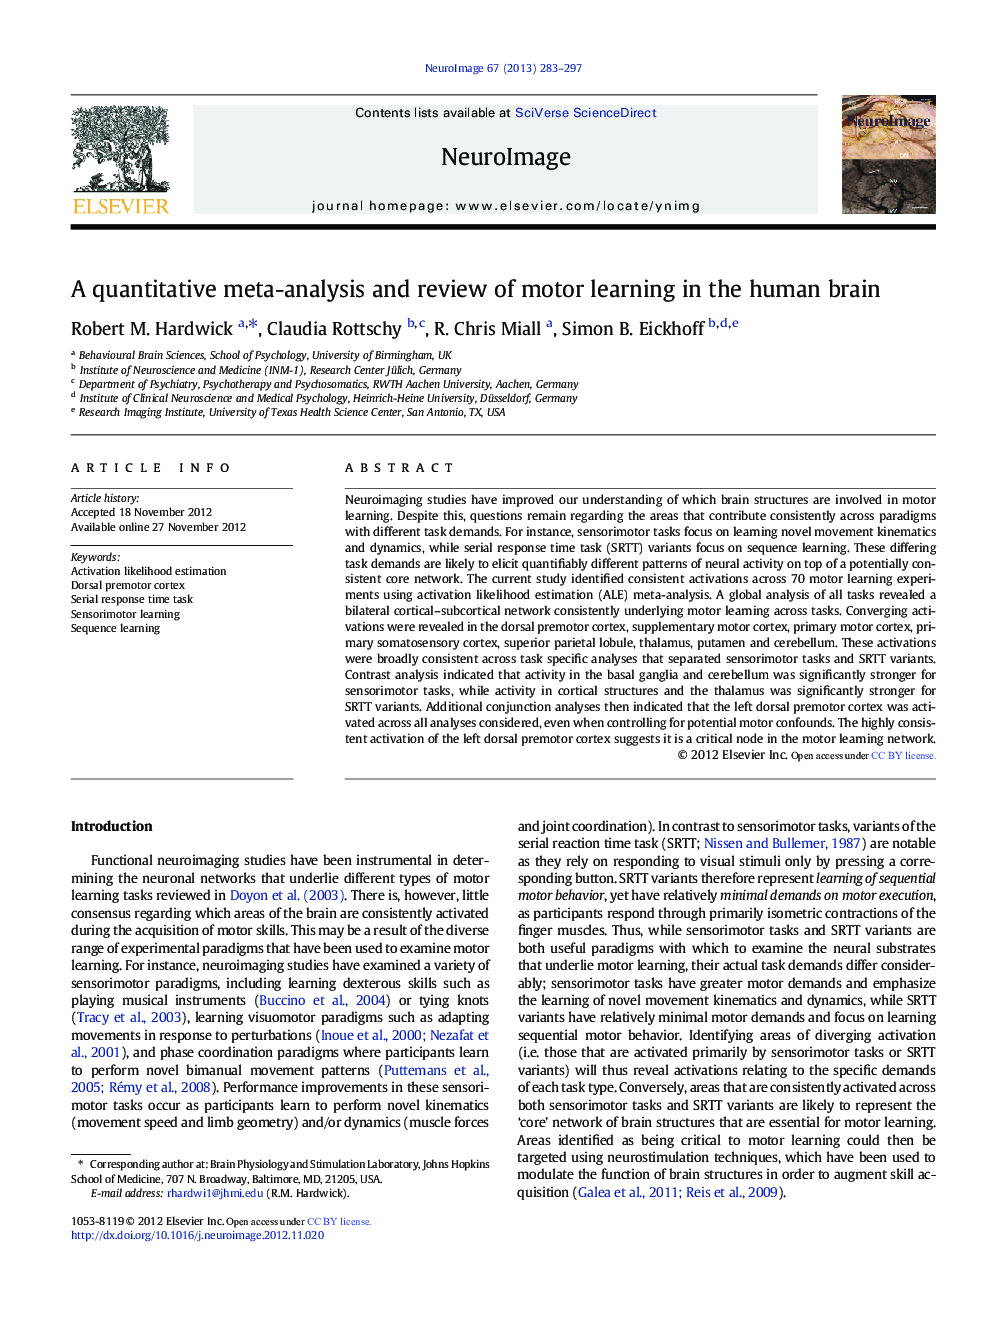 A quantitative meta-analysis and review of motor learning in the human brain